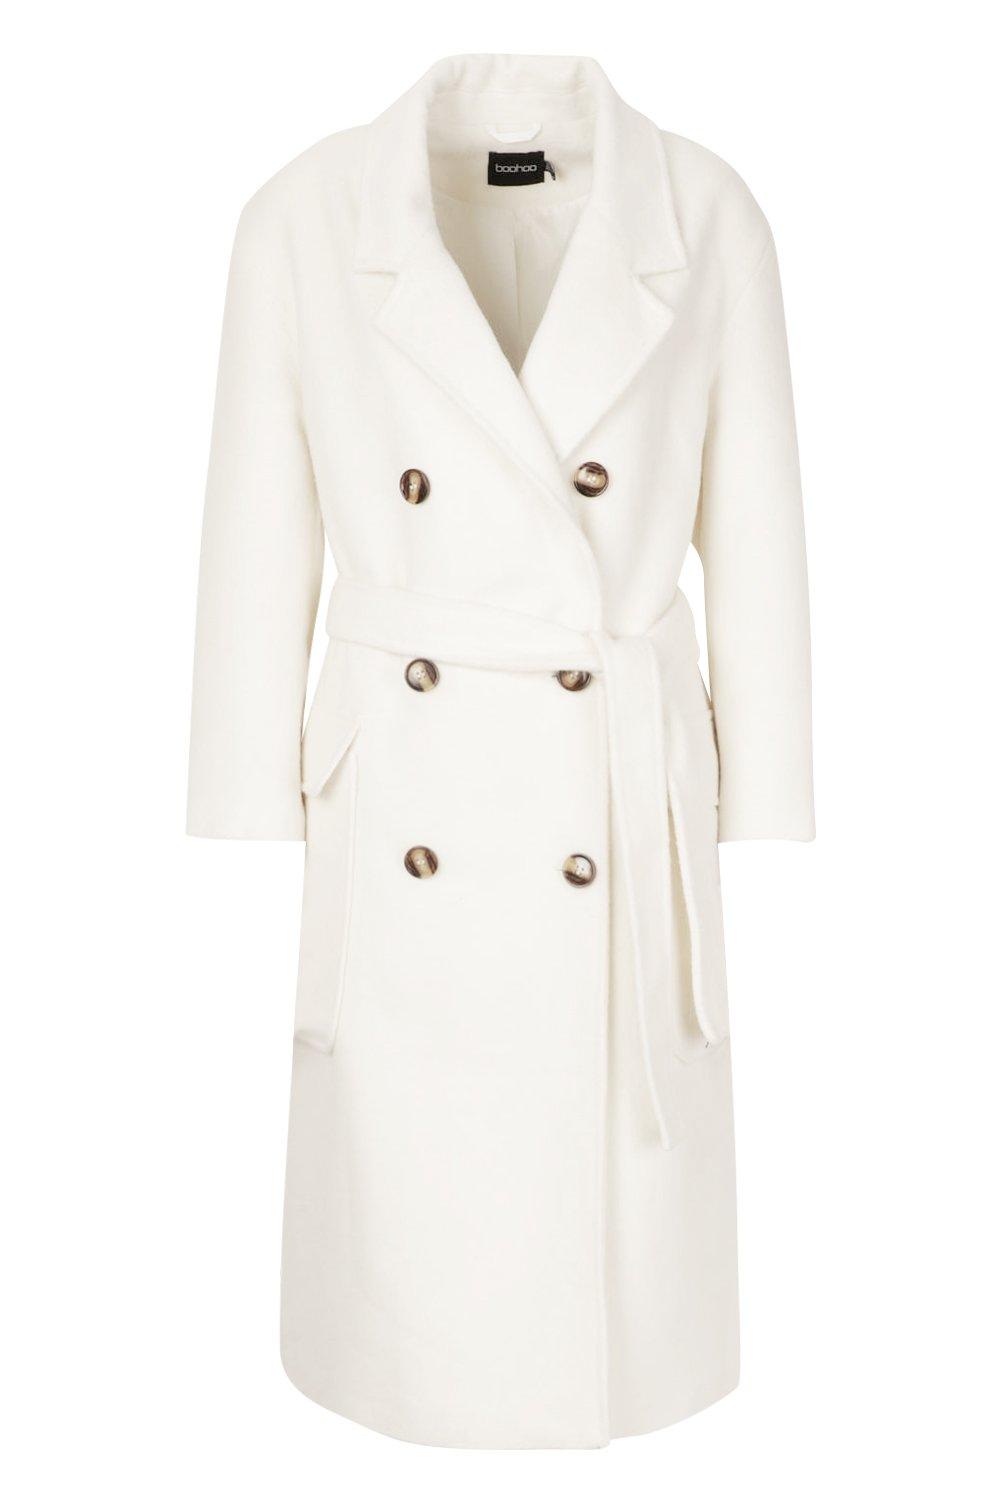 How To Wear Winter White Clothing For Every Occassion | HelloGiggles